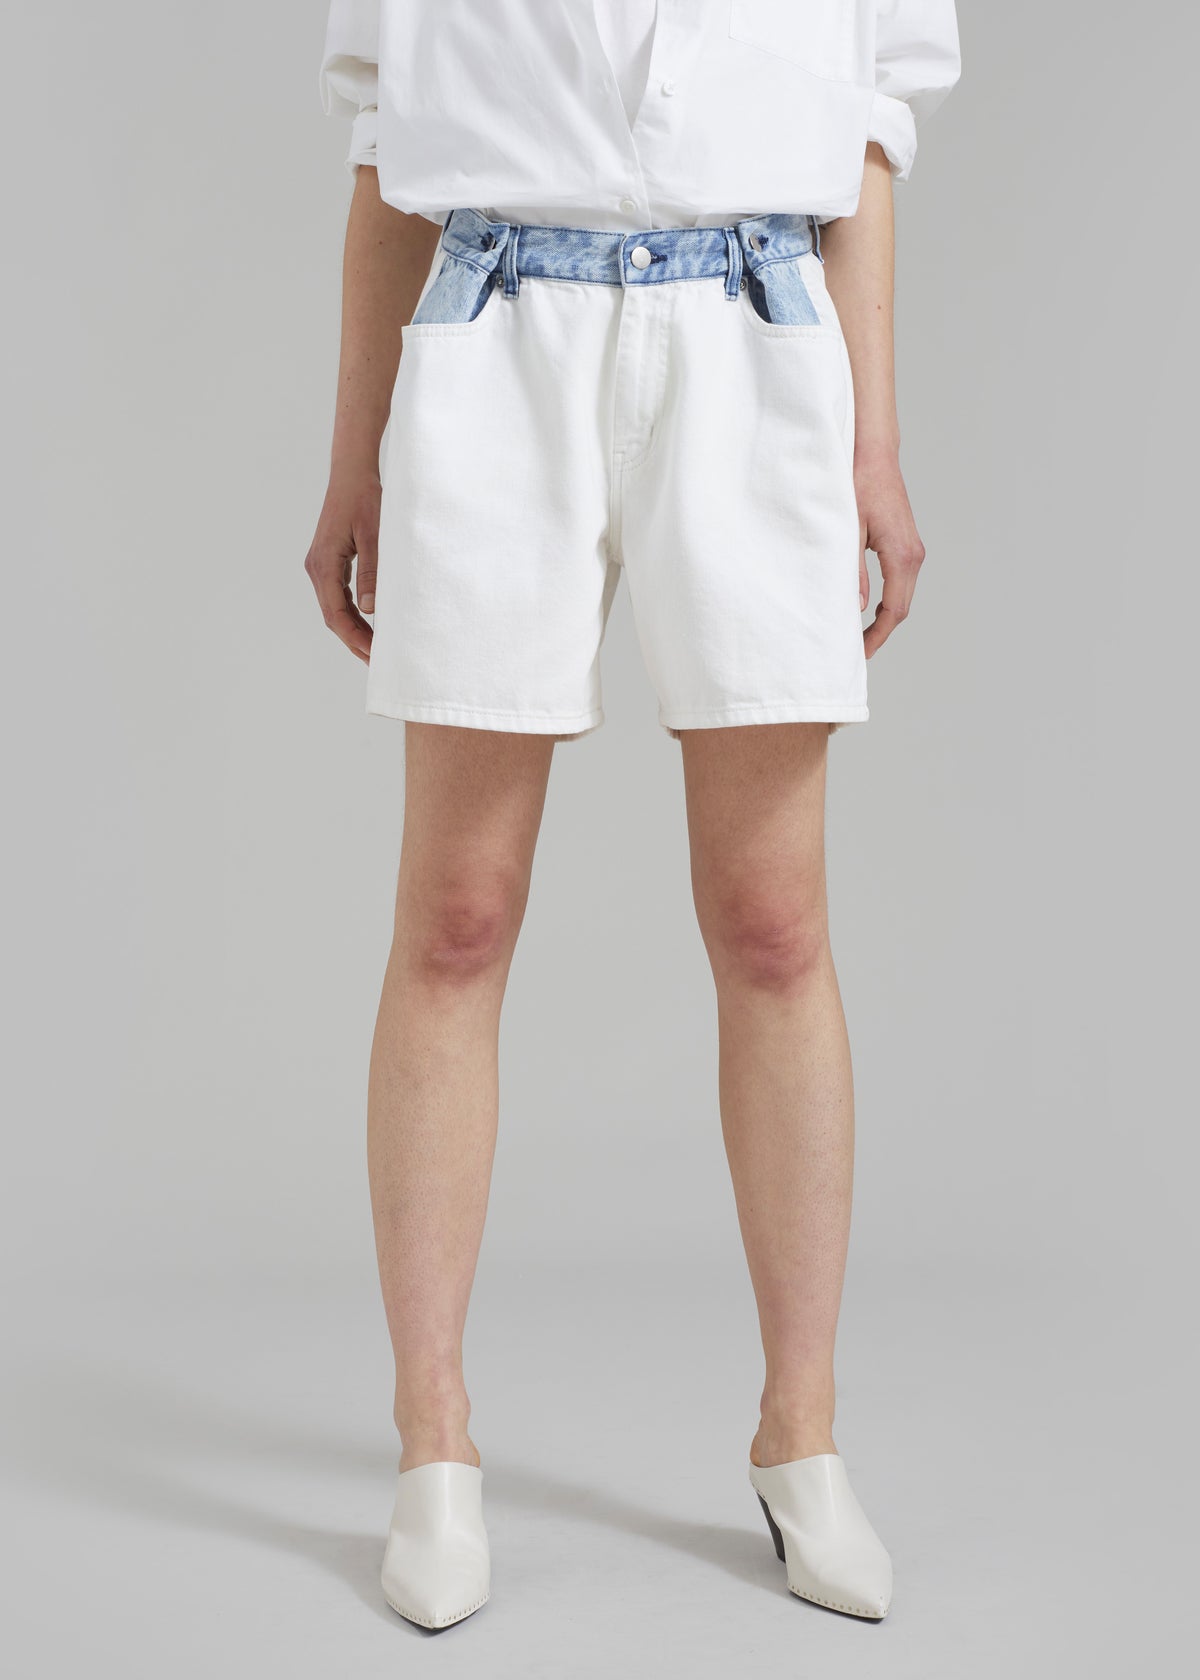 Hayla The Off Denim receive The larger Frankie will more you - Shop discount Contrast Shorts you buy, White/Blue the